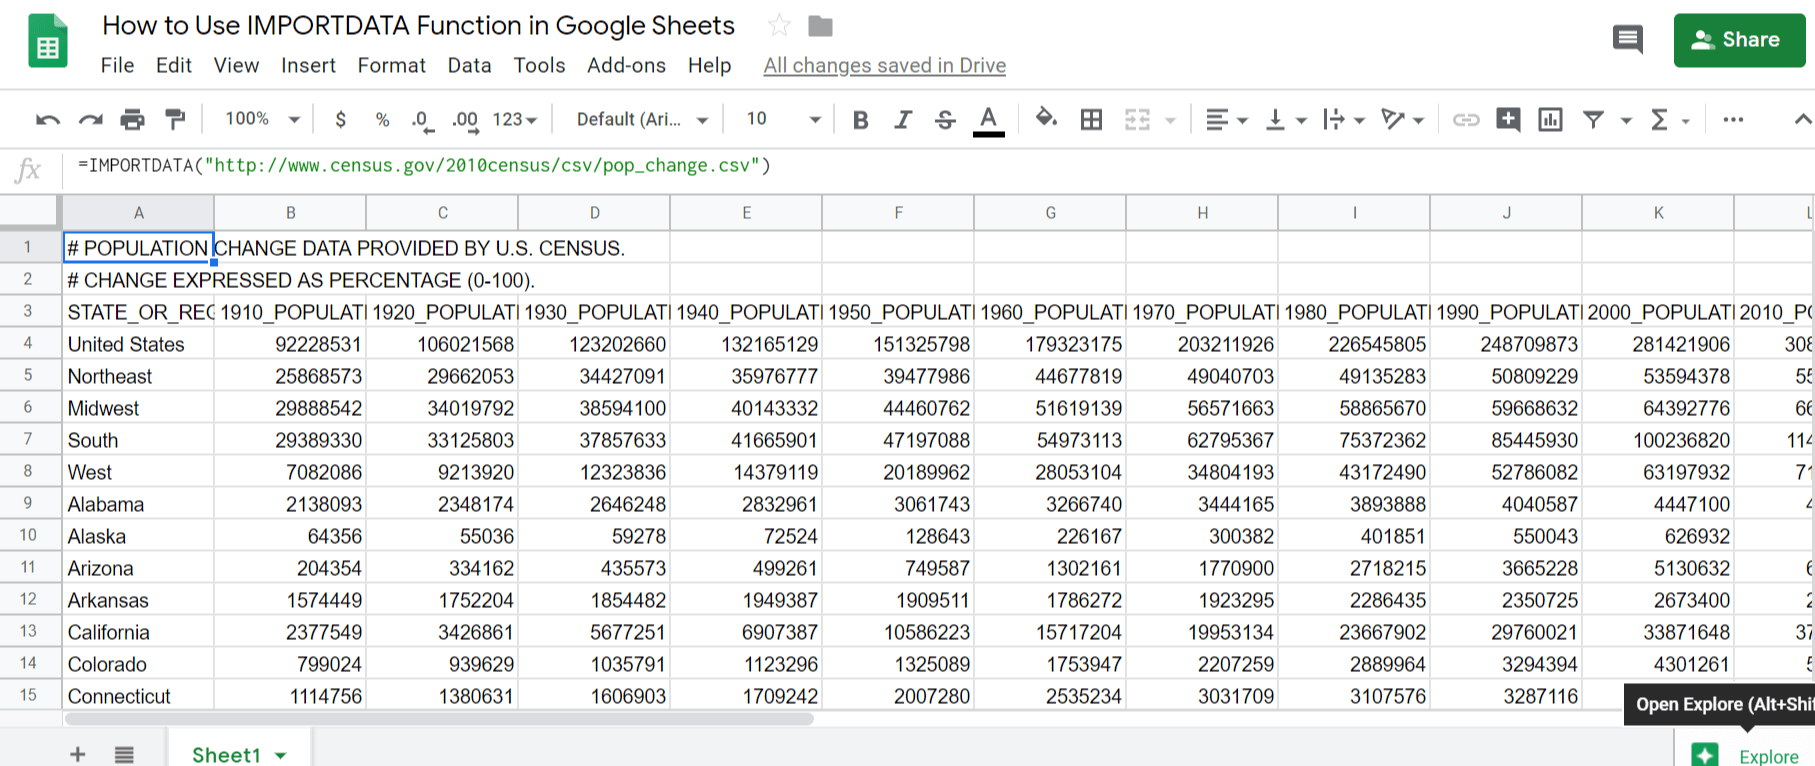 IMPORTDATA Function in Google Sheets